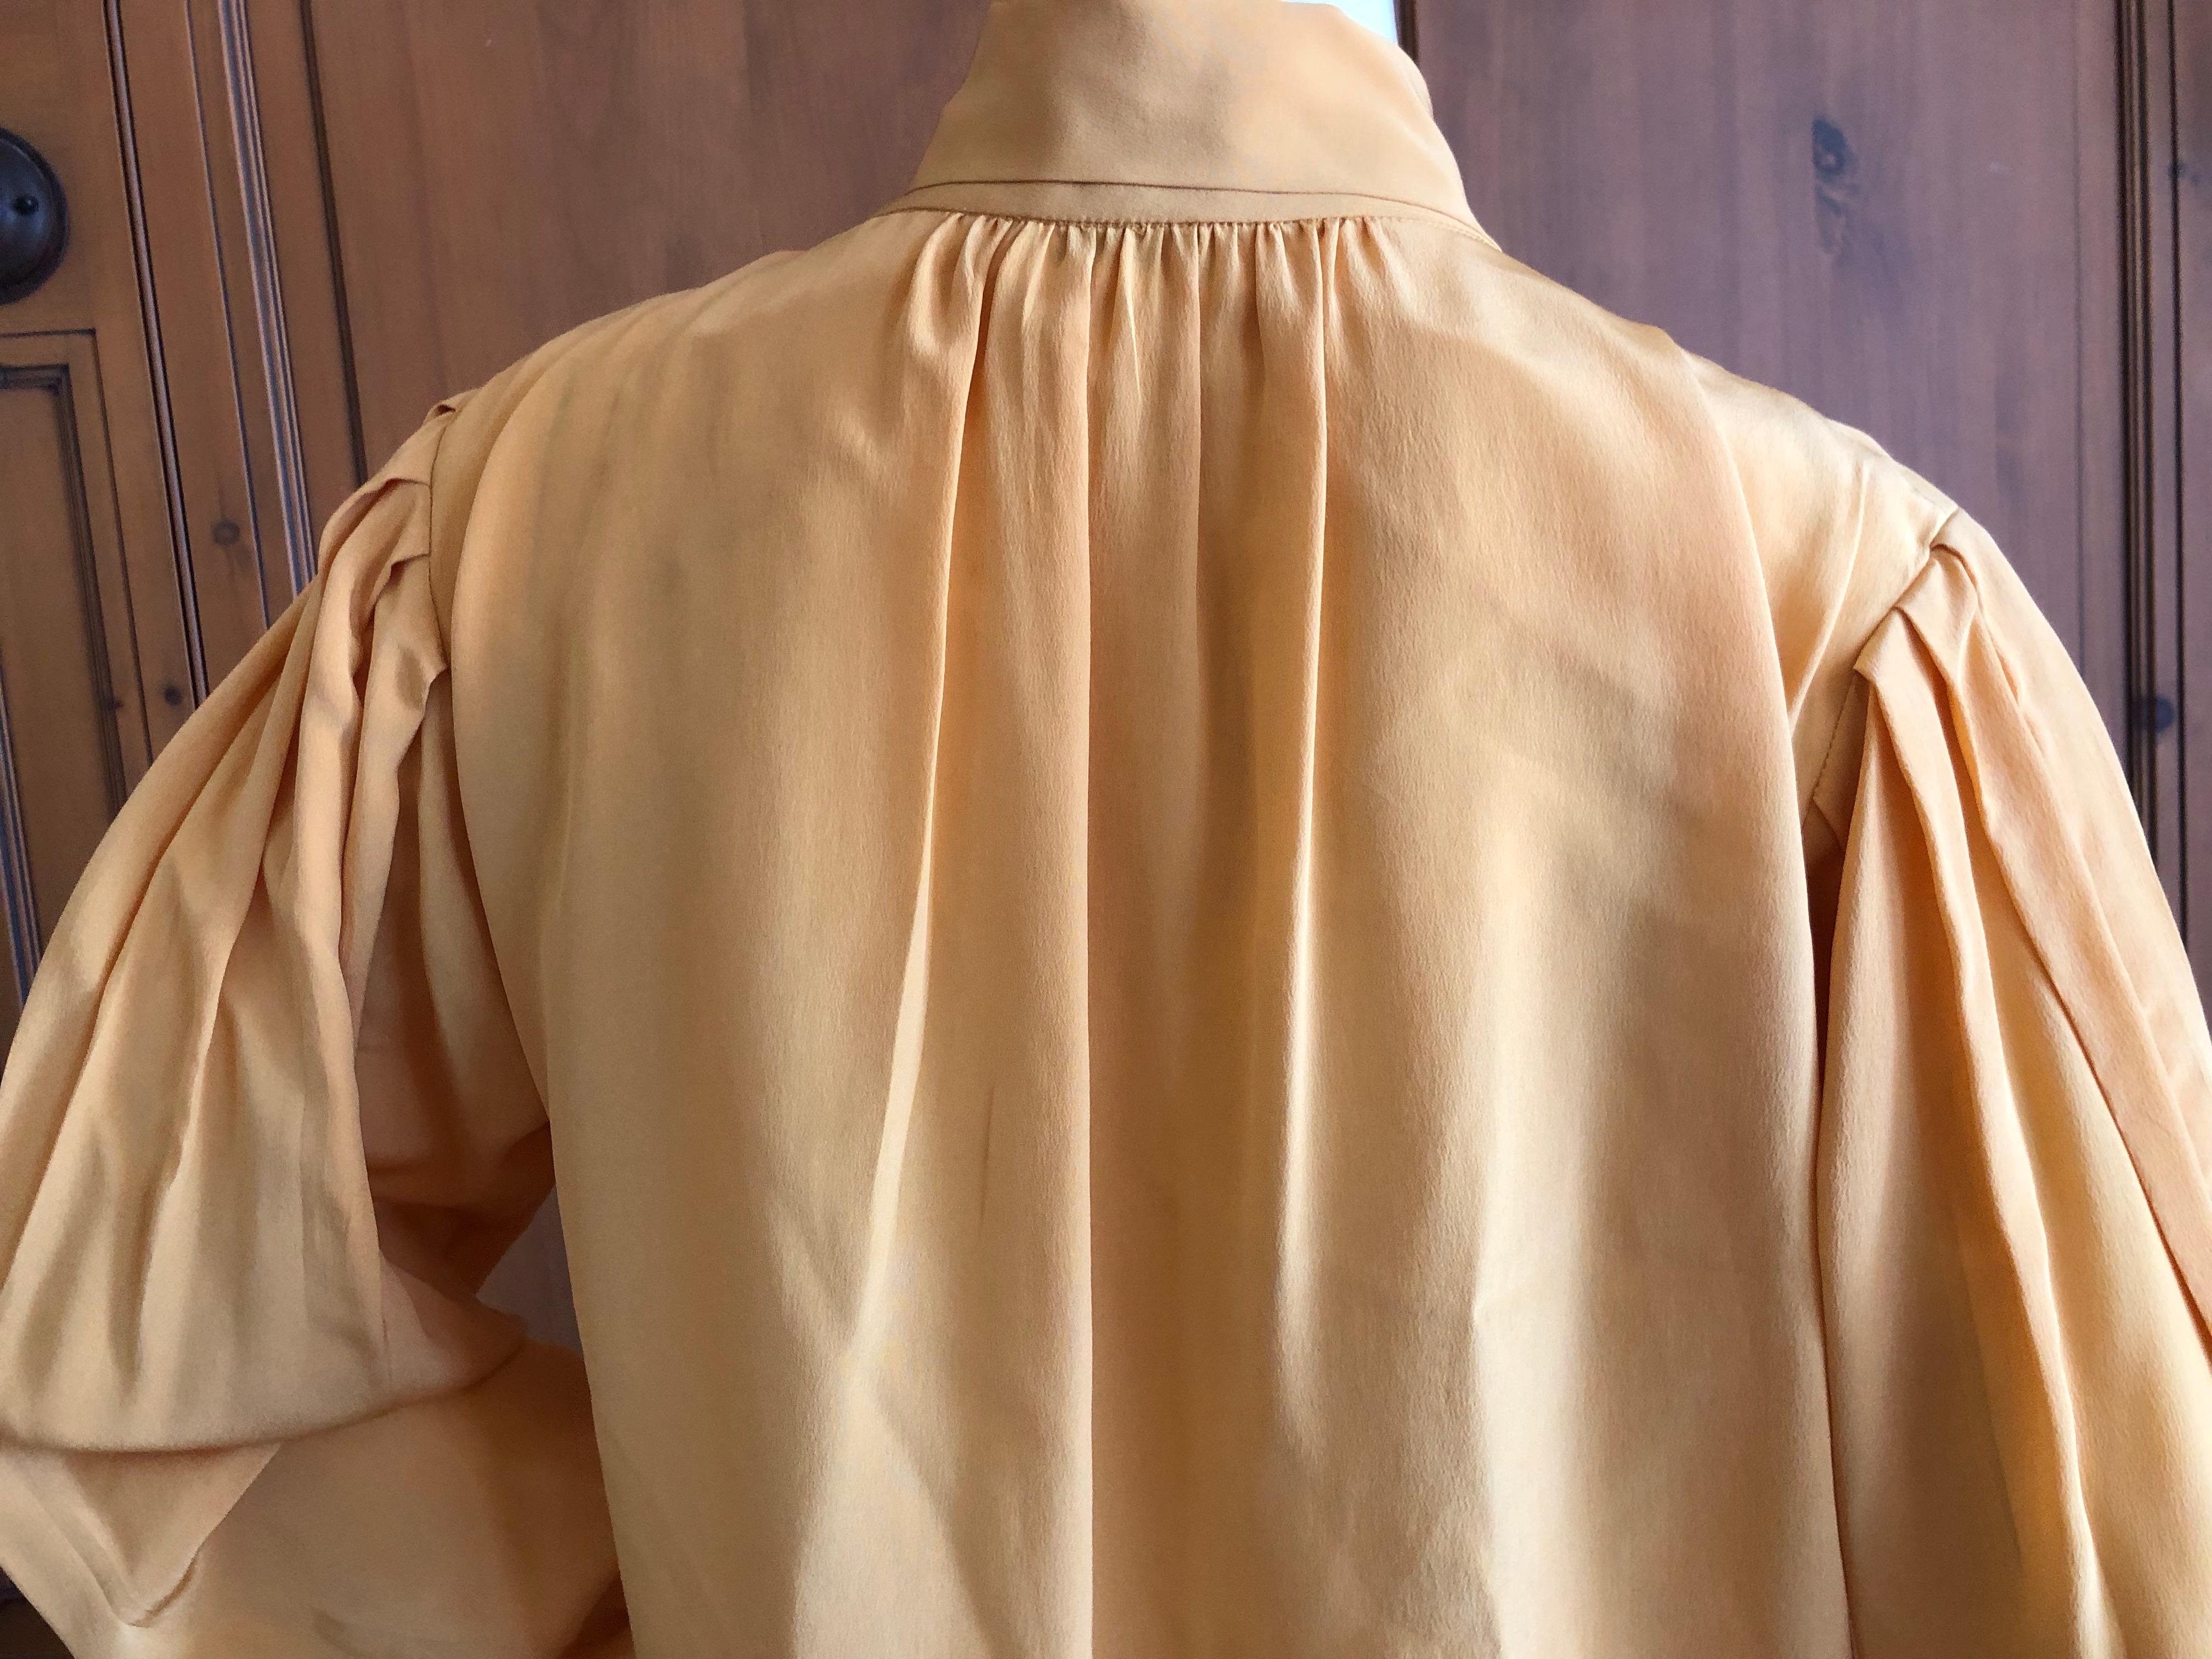 Yves Saint Laurent 70's Rive Gauche Silk Keyhole Blouse with Pussy Bow.
Size 38 but runs a little large for that size

Bust 36